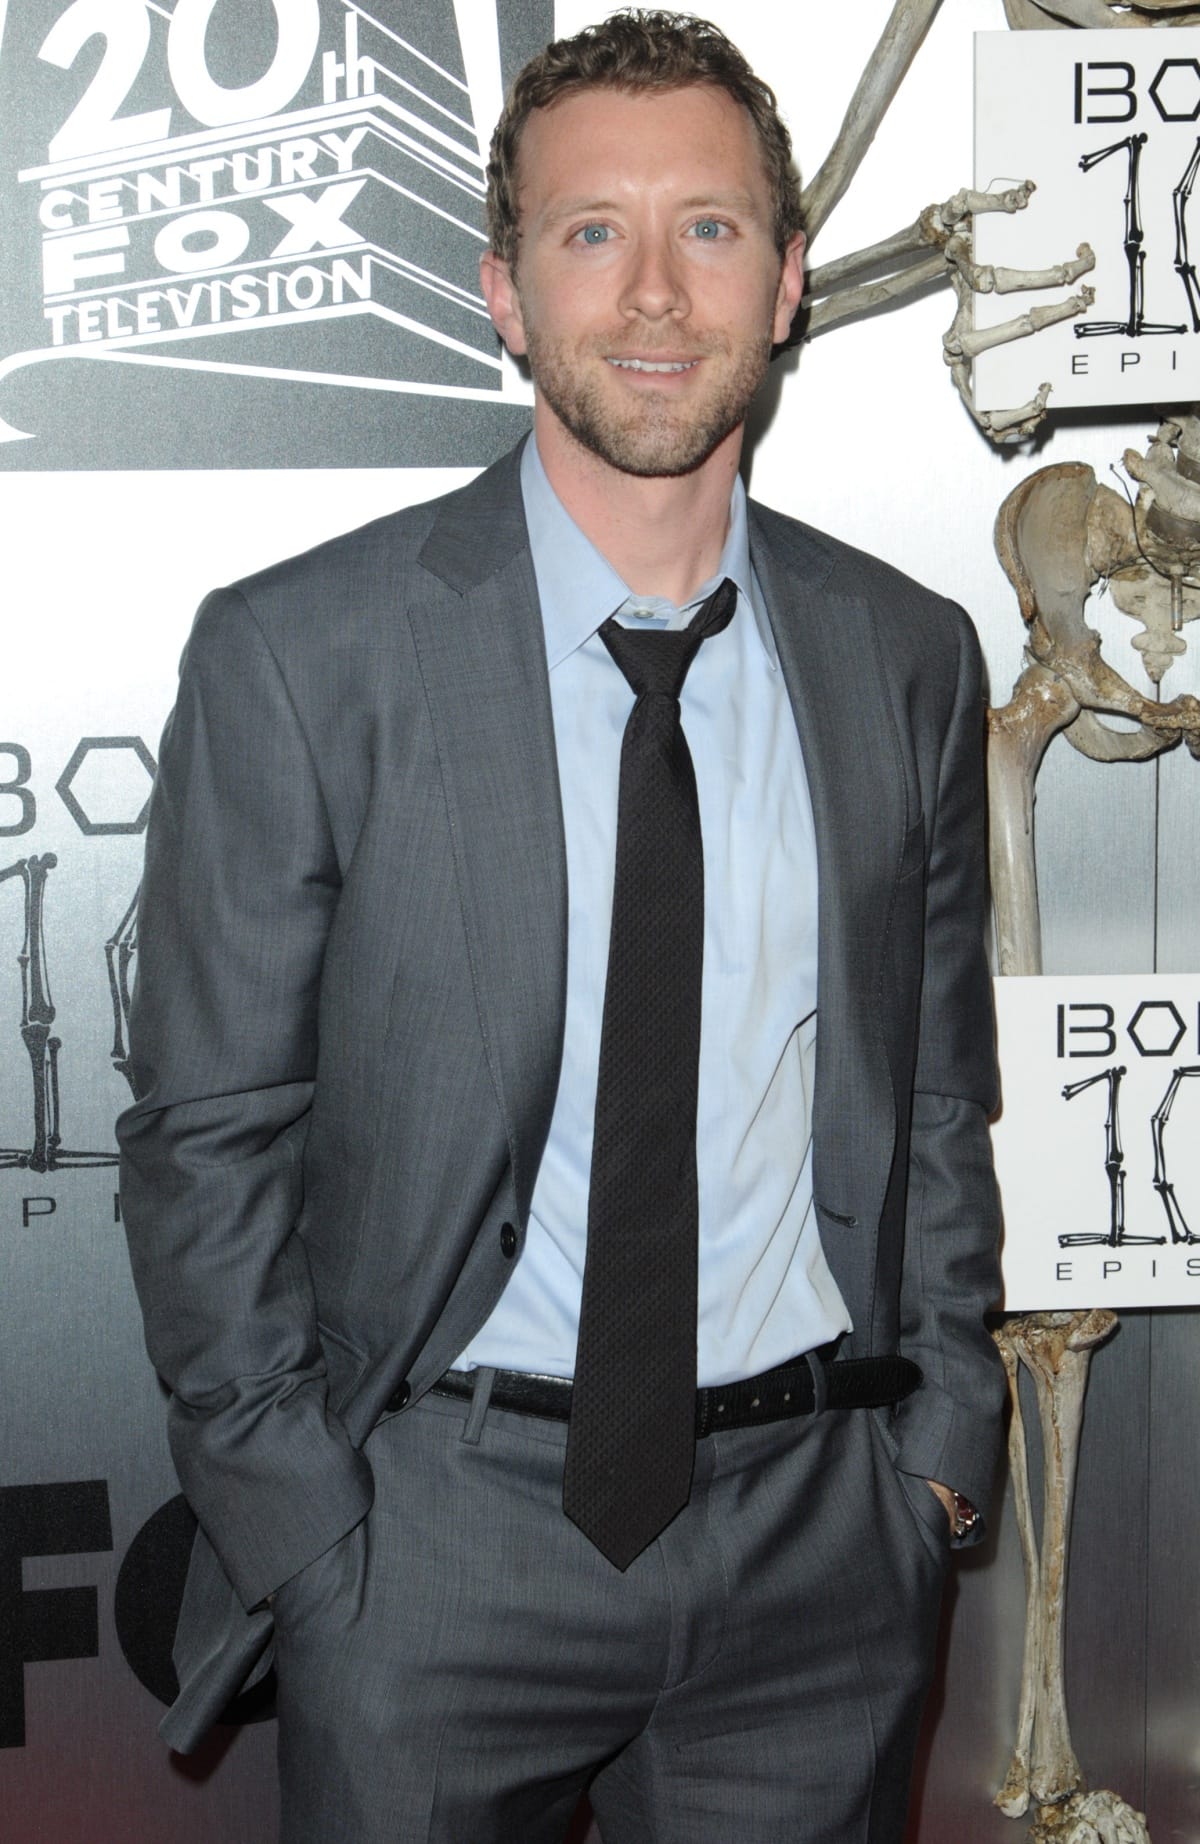 T.J. Thyne has a height of 5 feet and 7 inches, and he has a net worth of $10 million